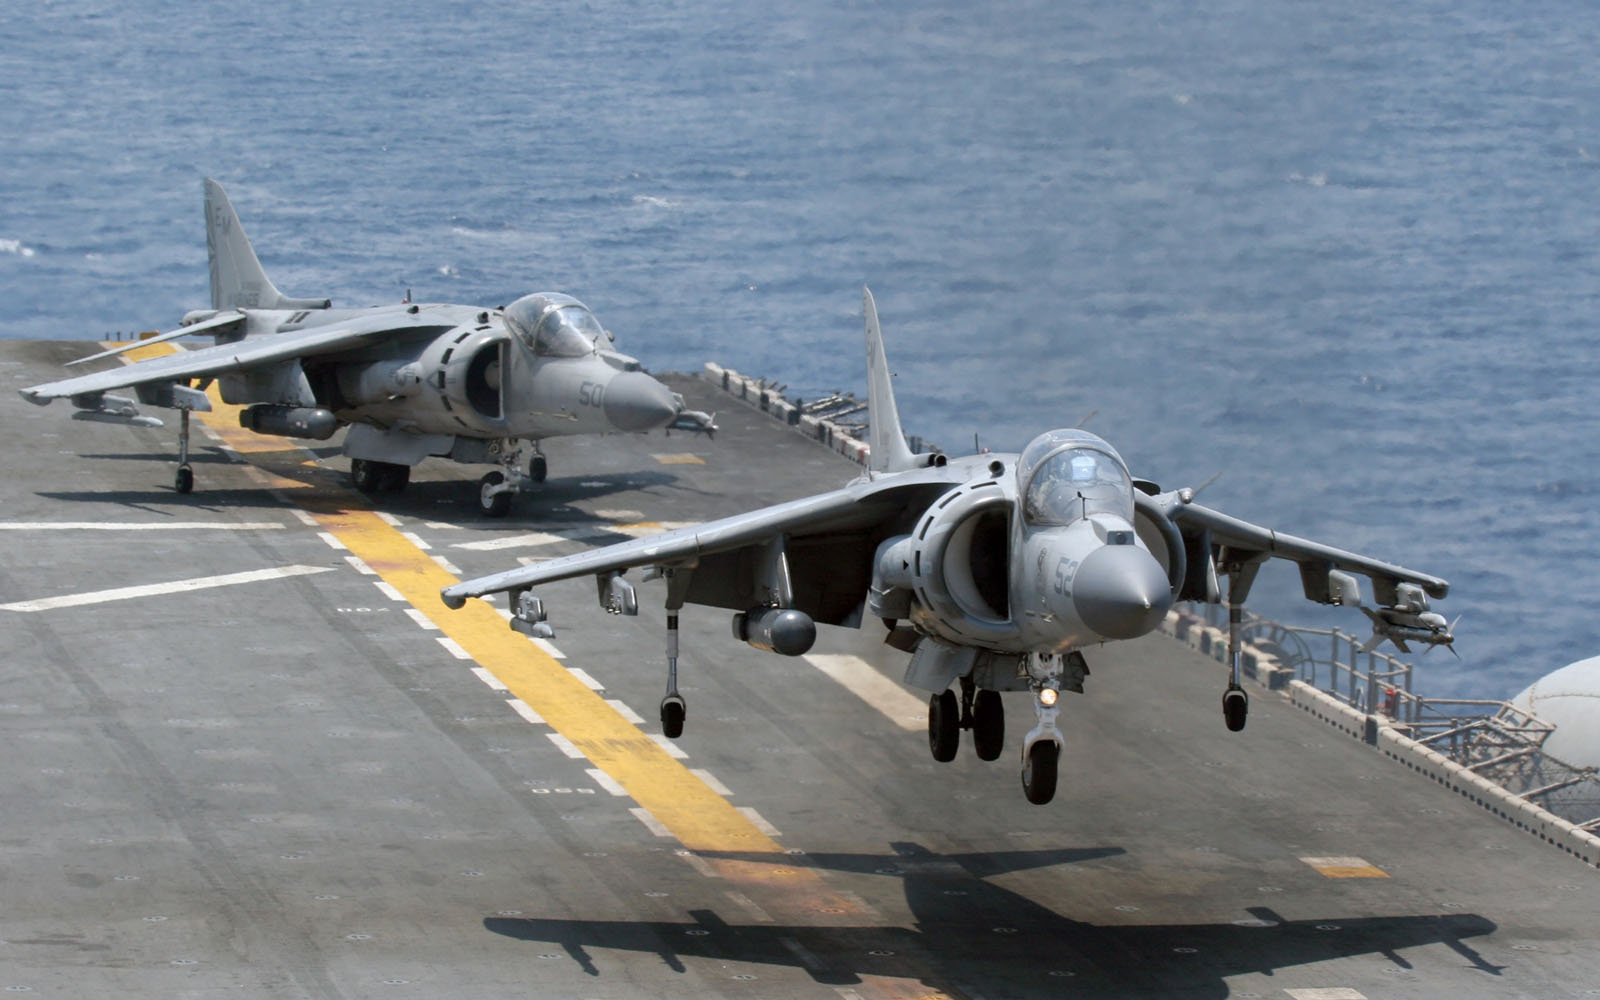 Harrier Ii Aircraft Wallpaper Image Photos And Pictures For